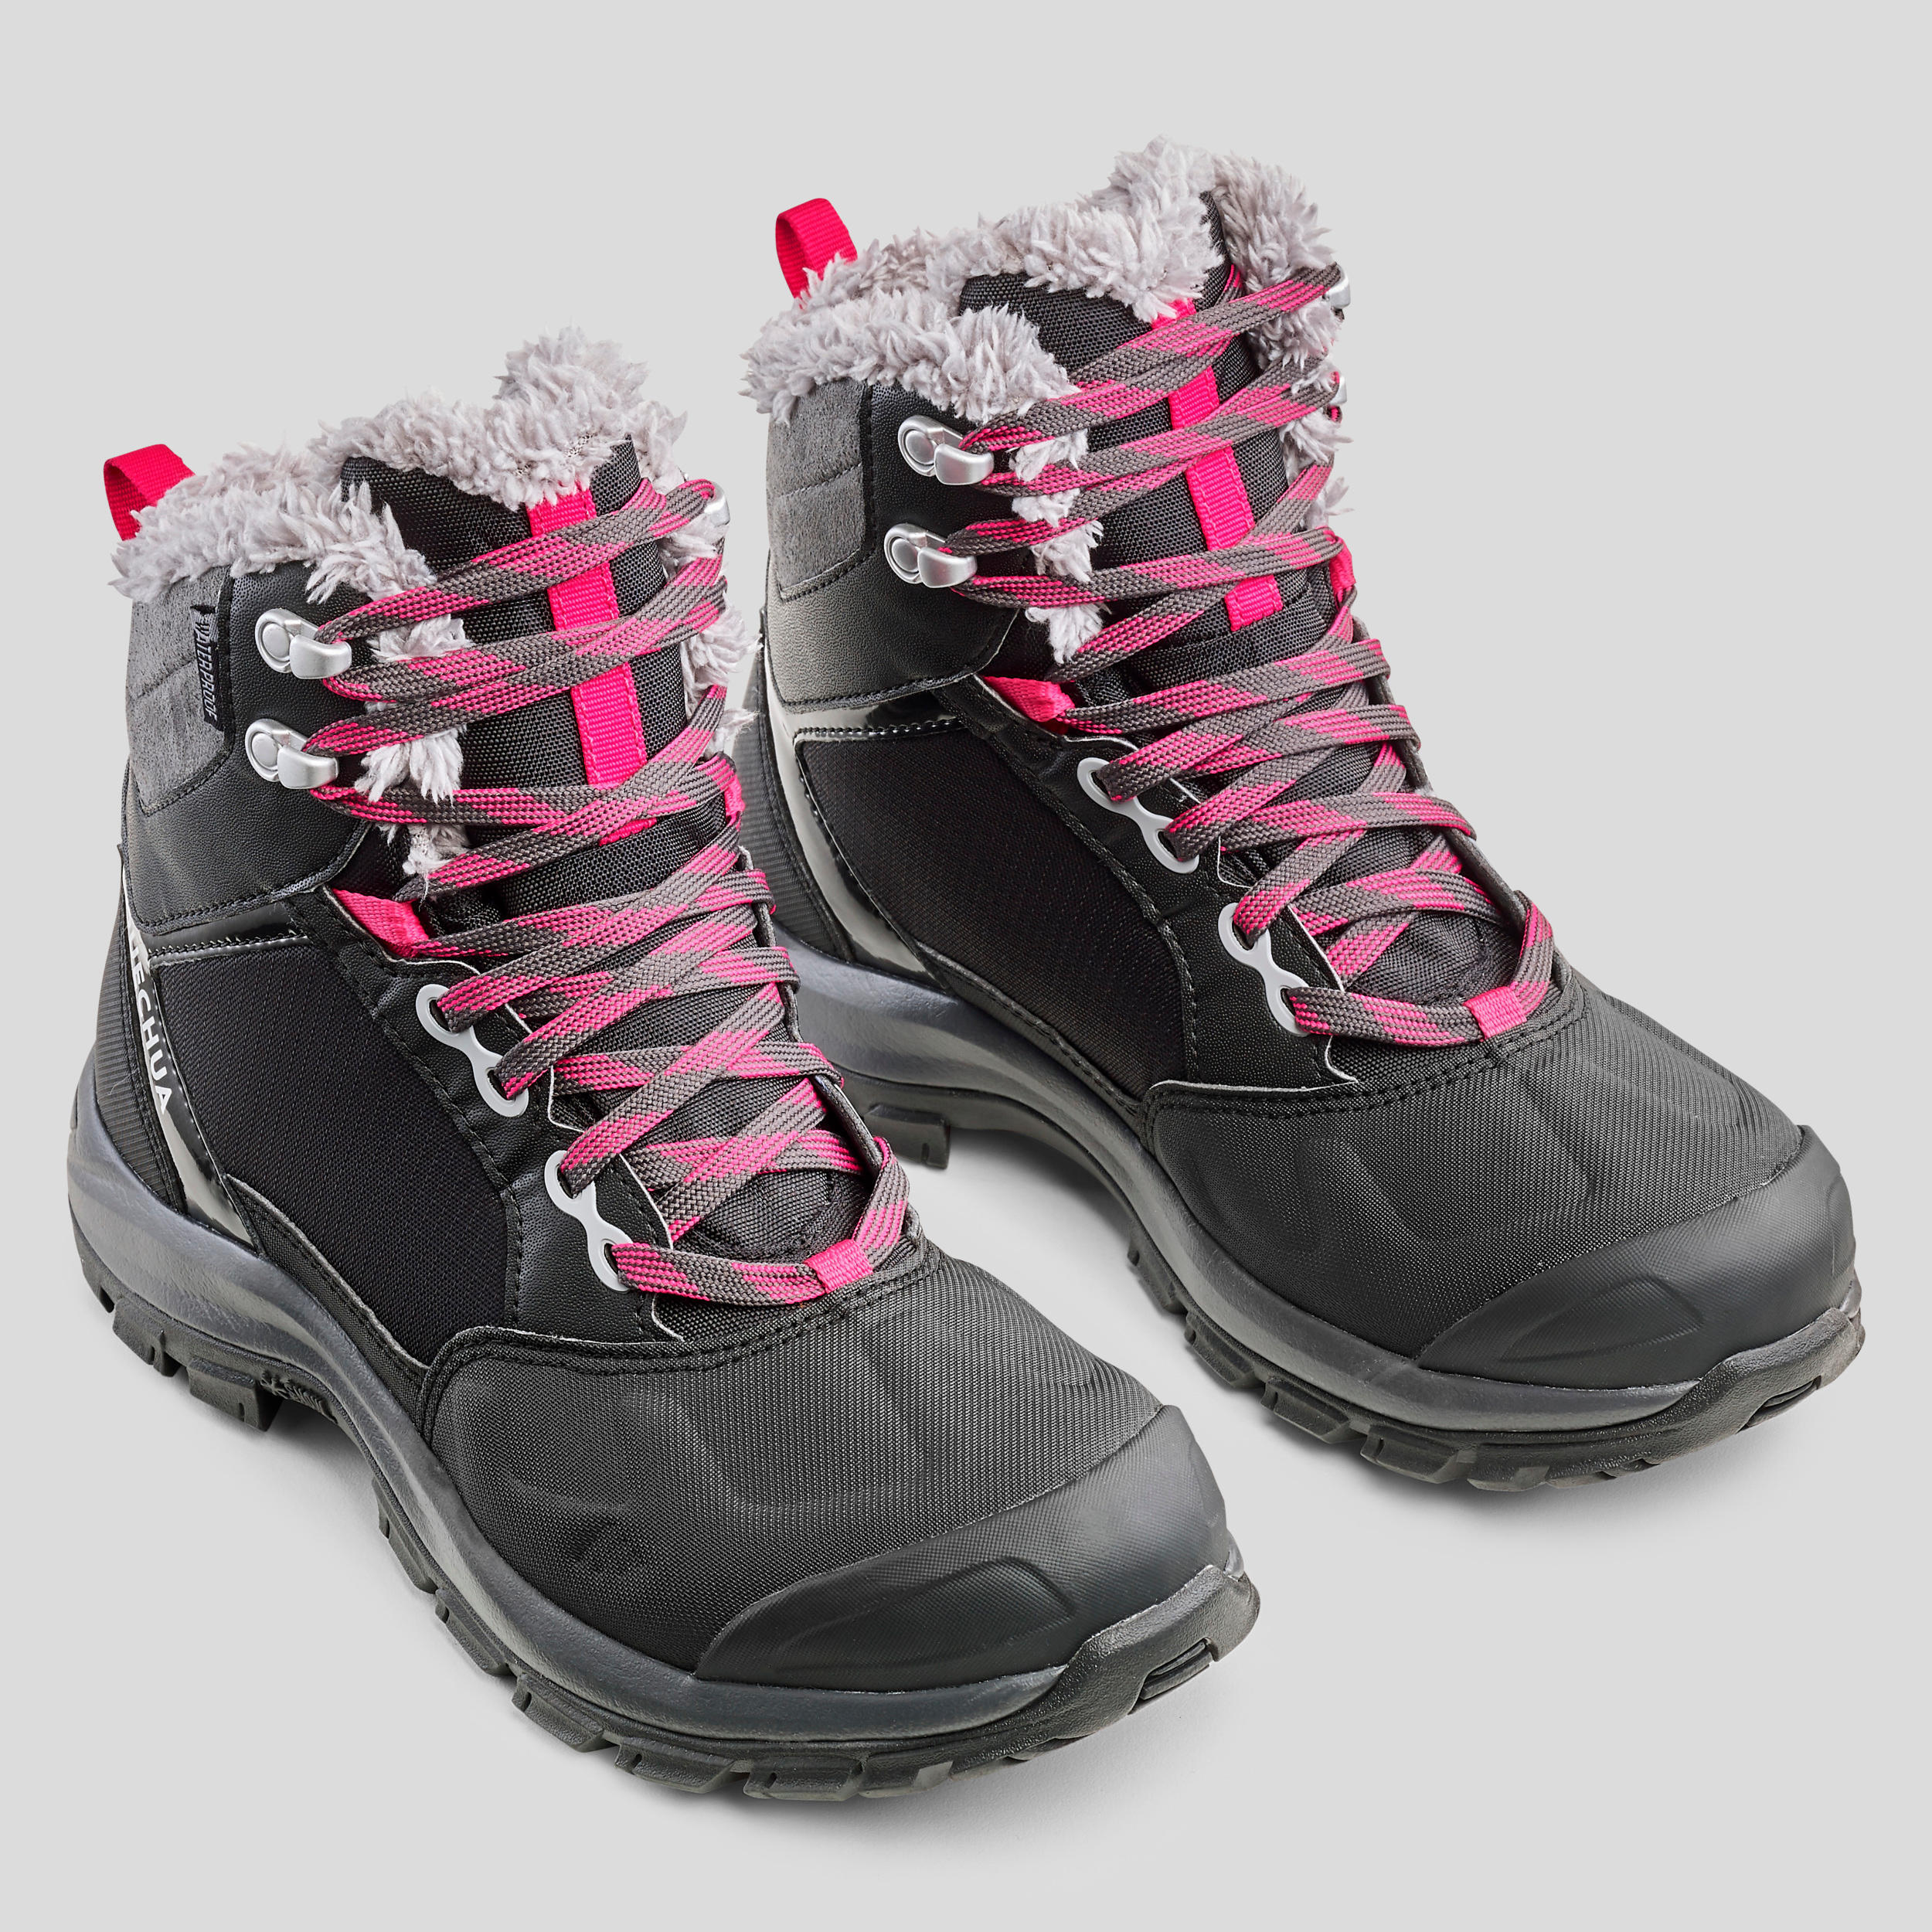 Women's Warm and Waterproof Hiking Boots - SH500 mountain MID 2/7